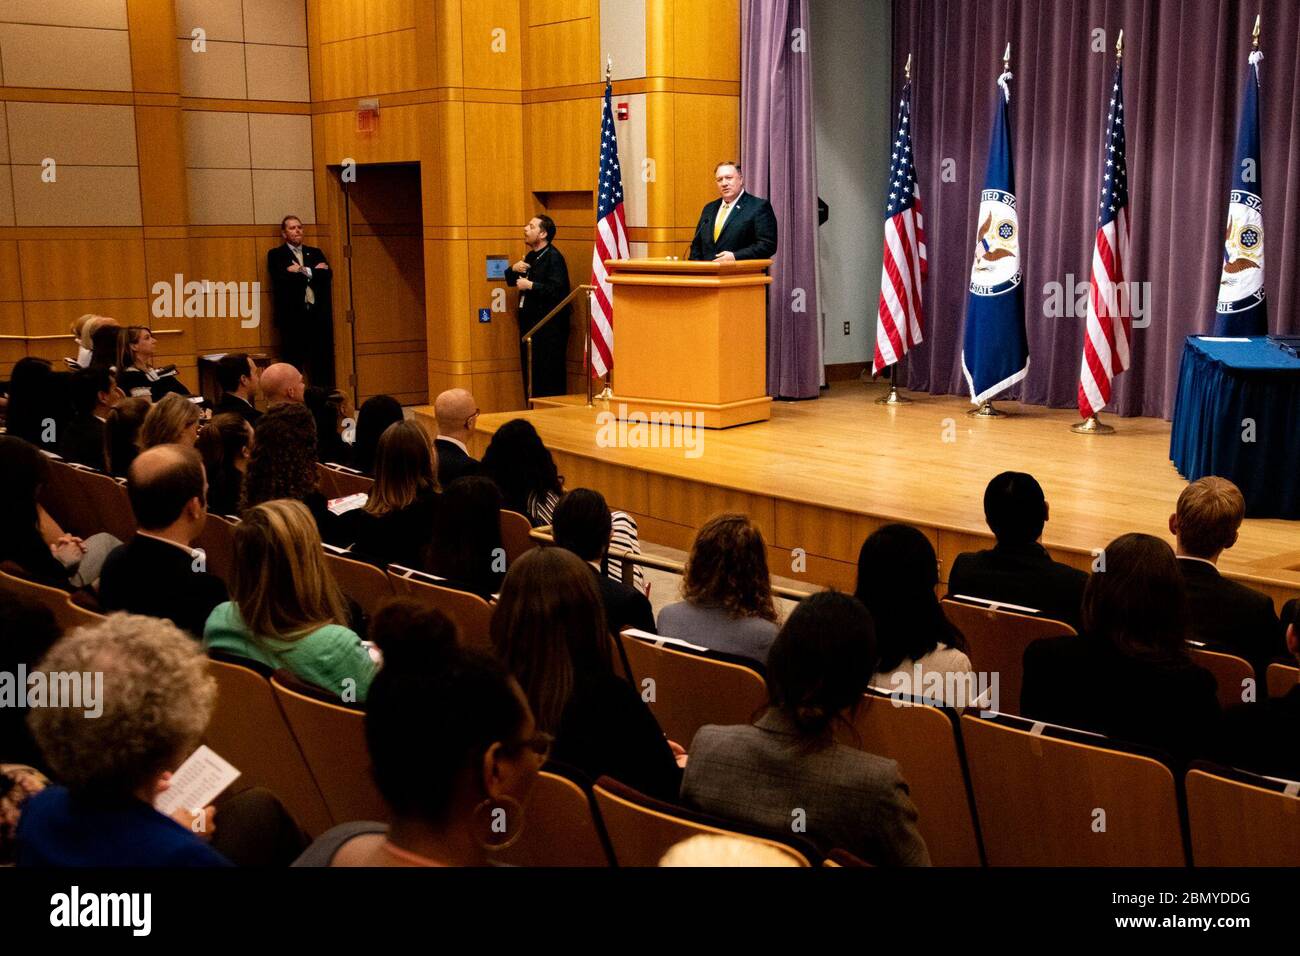 Secretary Pompeo Gives Remarks at the 2019 Presidential Management Fellow (PMF) Graduation Ceremony U.S. Secretary of State Michael R. Pompeo gives remarks at the 2019 Presidential Management Fellow (PMF) graduation ceremony at the U.S. Department of State in Washington, D.C., on June 19, 2019. Stock Photo